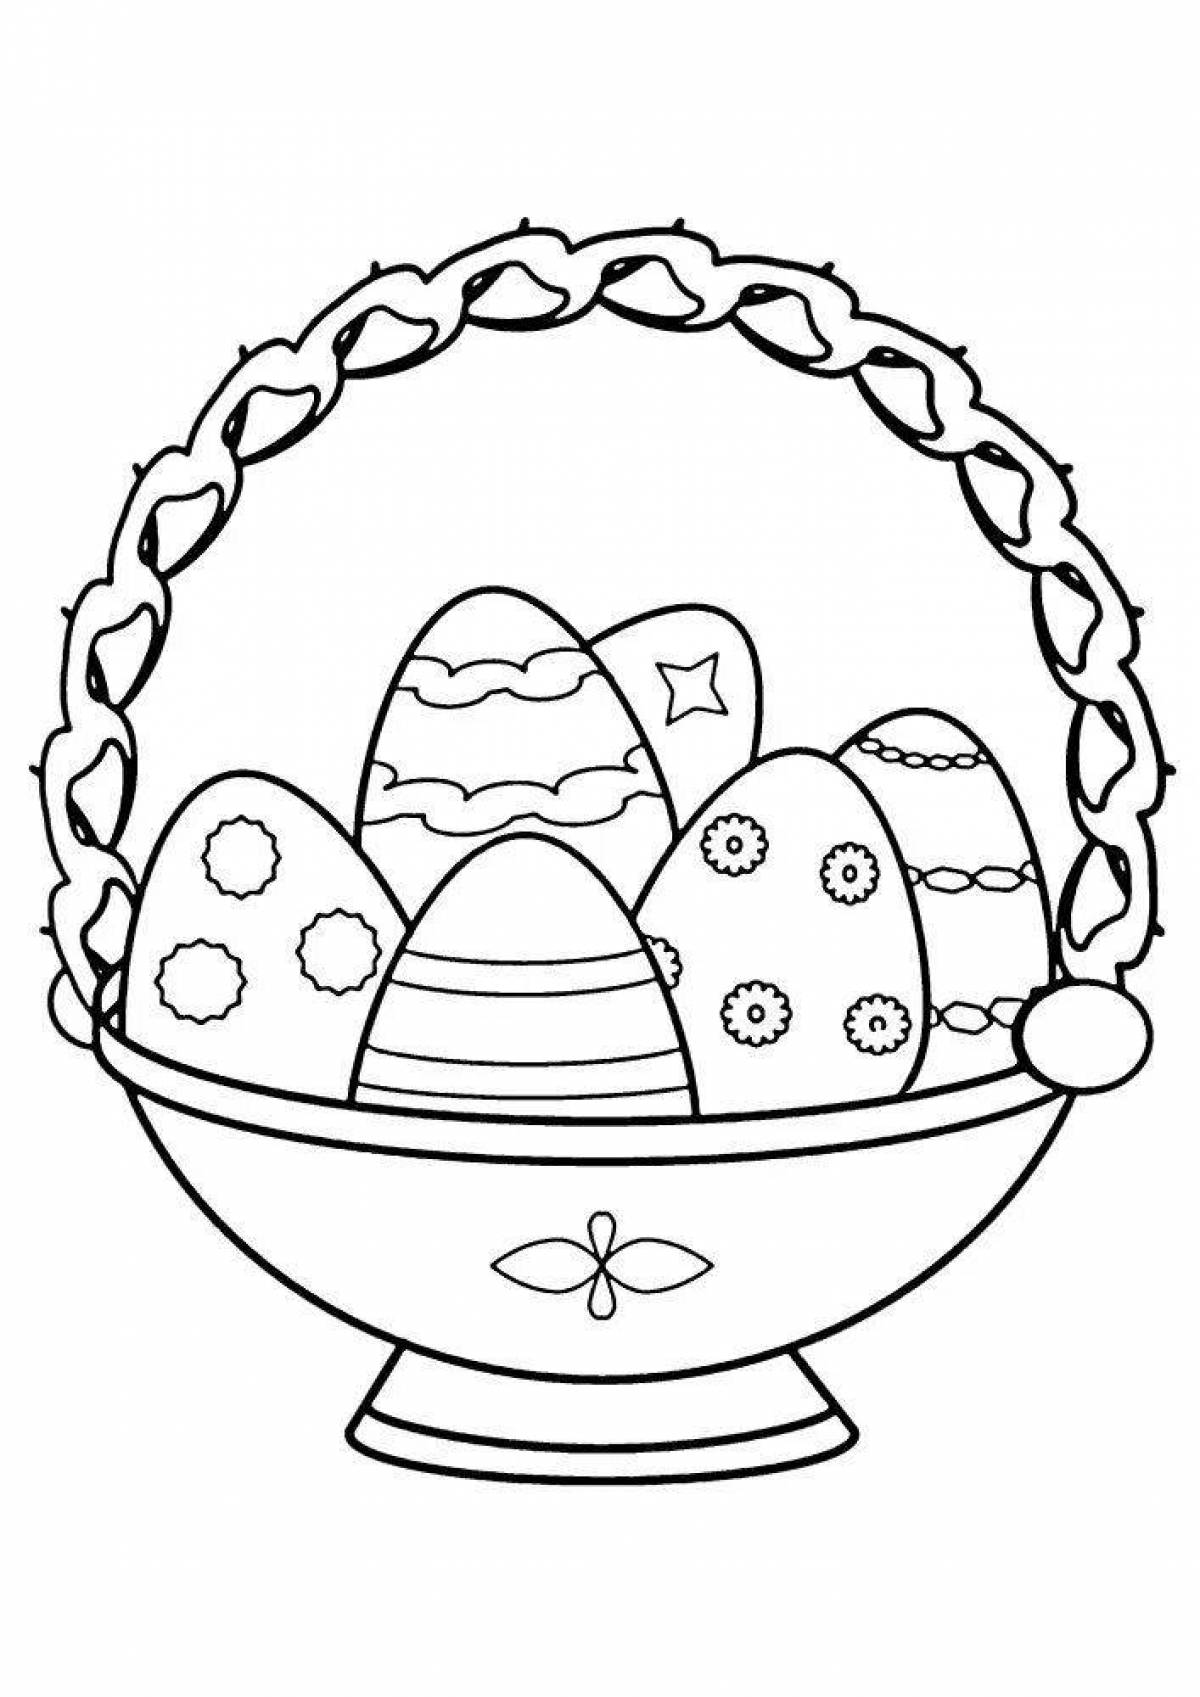 Large Easter coloring book